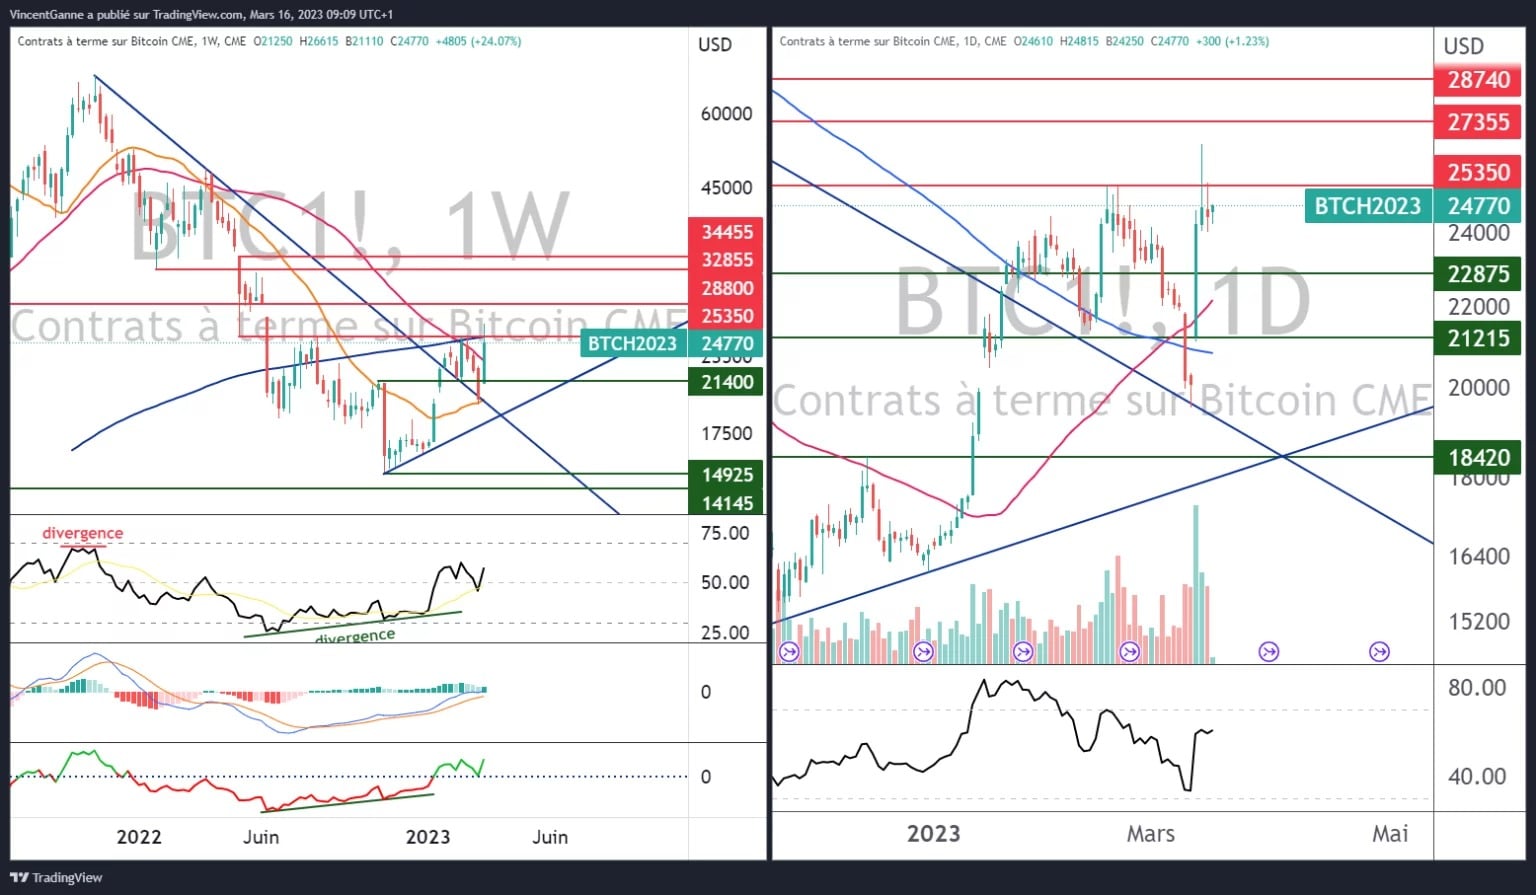 Chart showing the weekly (left) and daily (right) Japanese candlesticks for the bitcoin future contract on the Chicago Stock Exchange